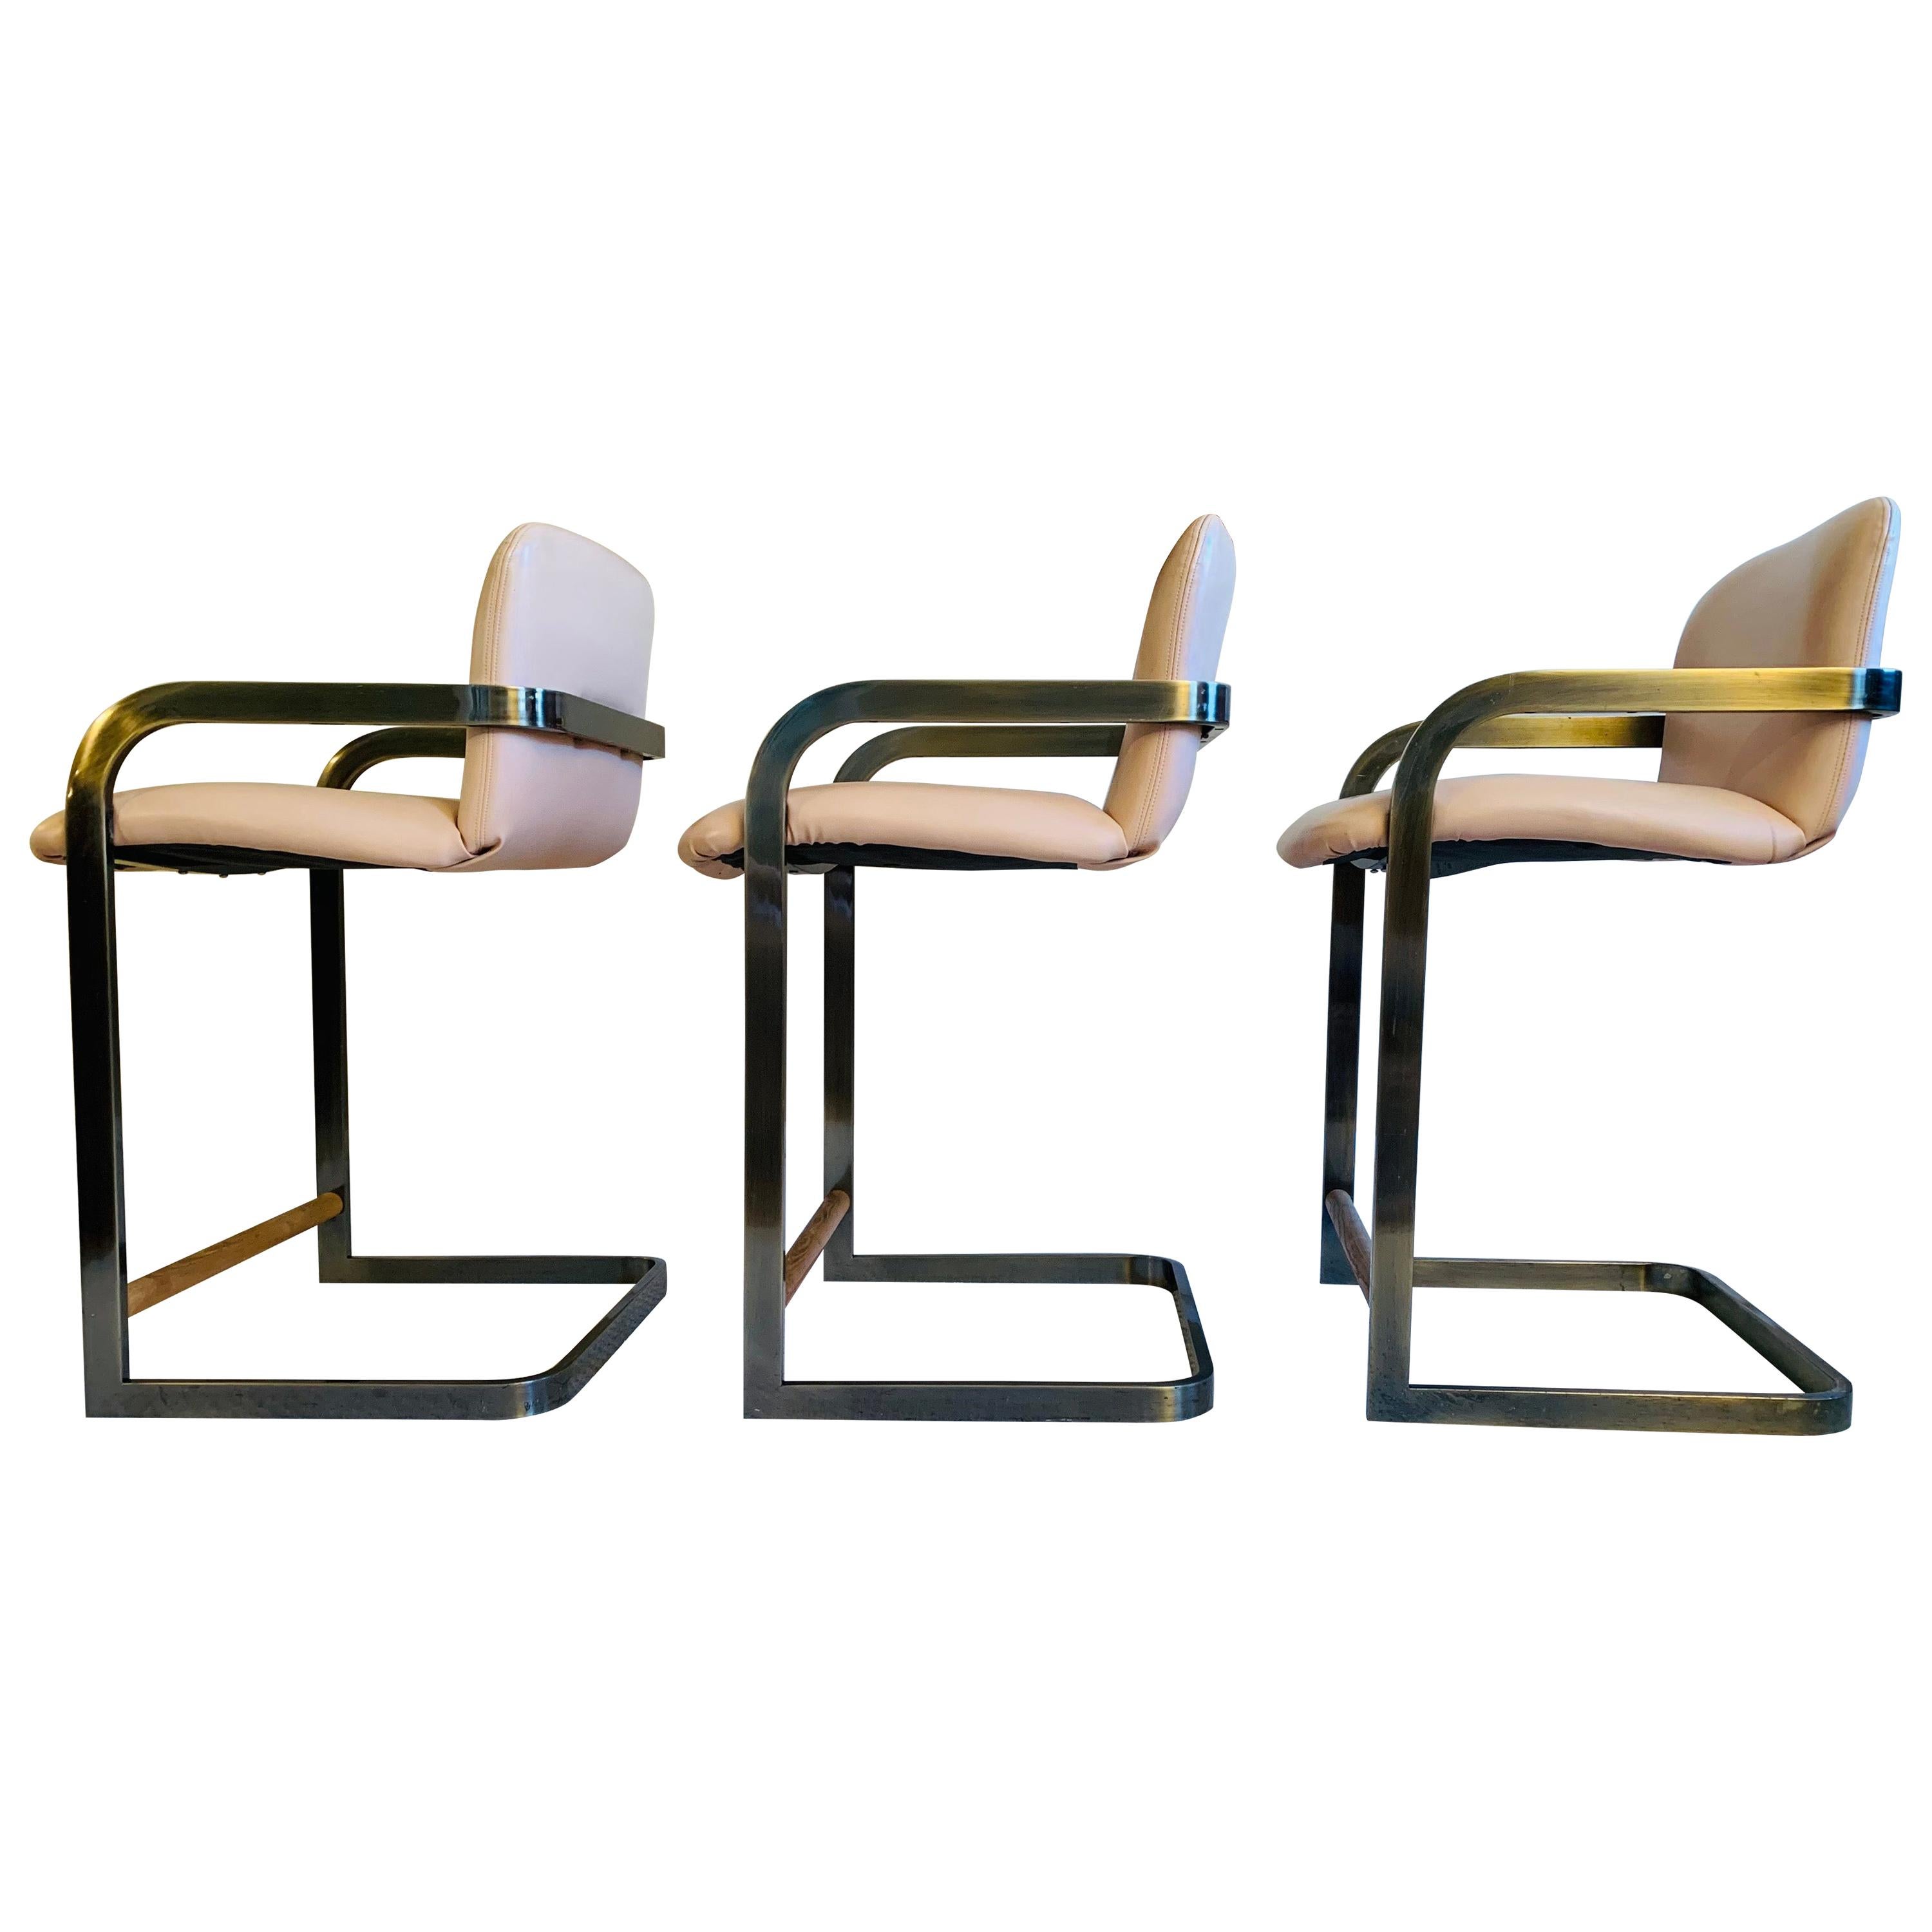 Vintage Midcentury Cantilever Stools in the Milo Baughman Style by D.I.A. 1980's